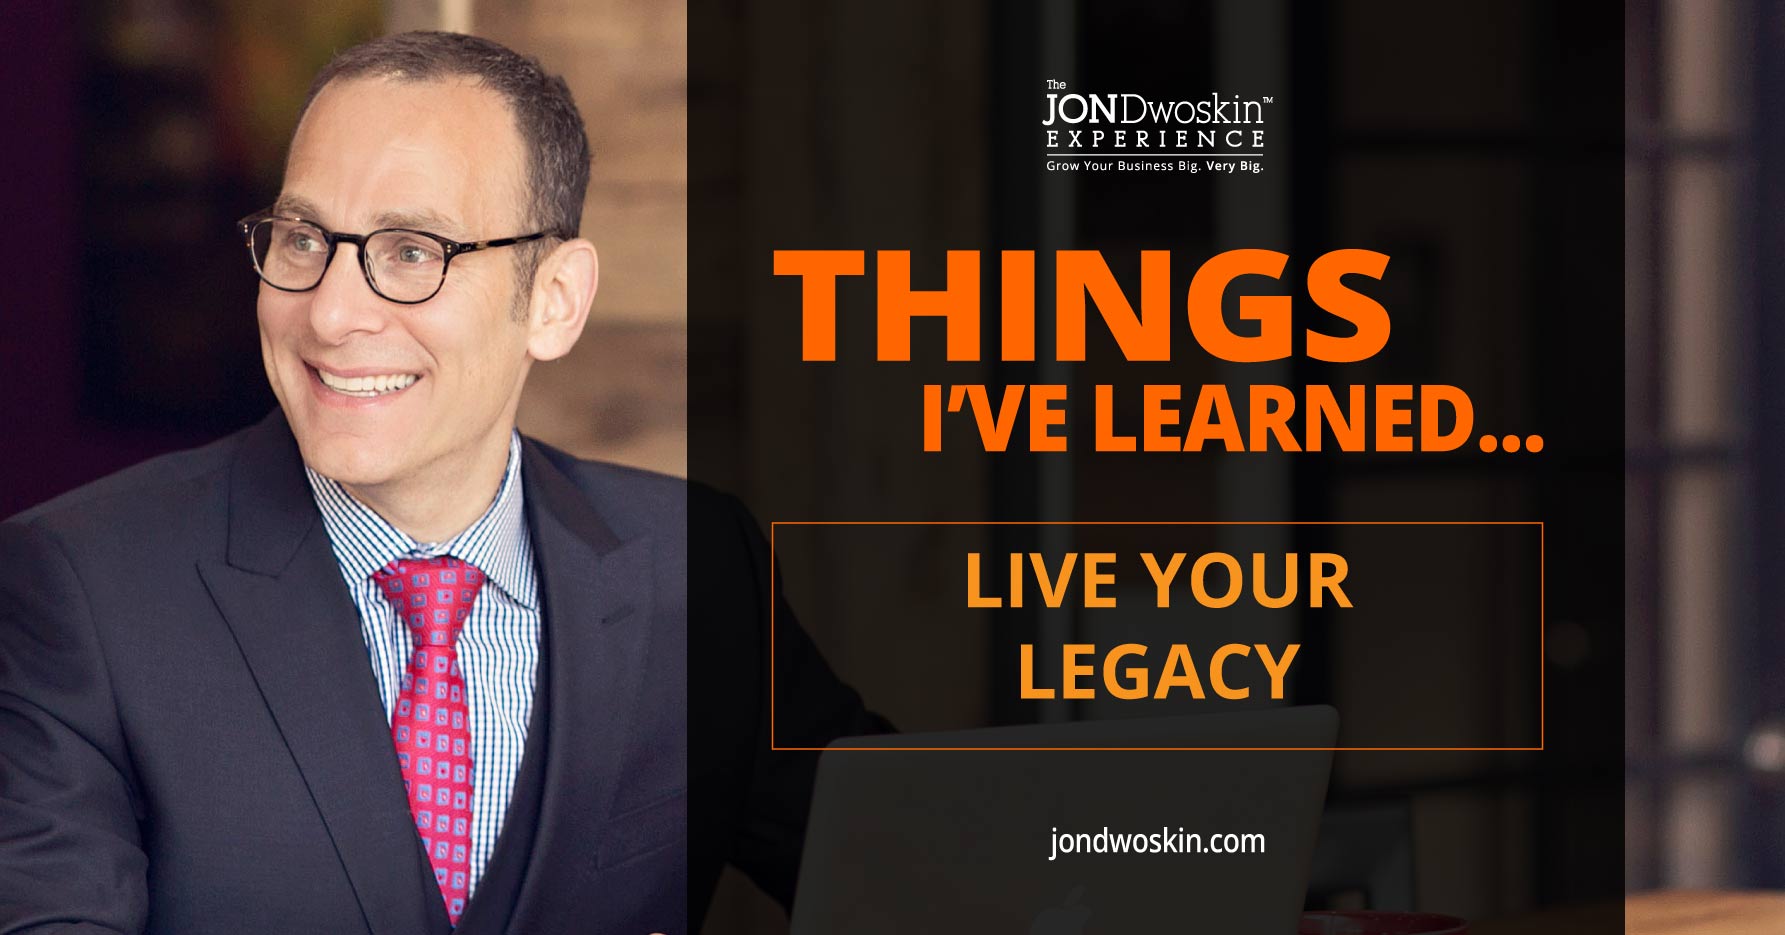 5 Things I’ve Learned in My 50 Years: Live Your Legacy